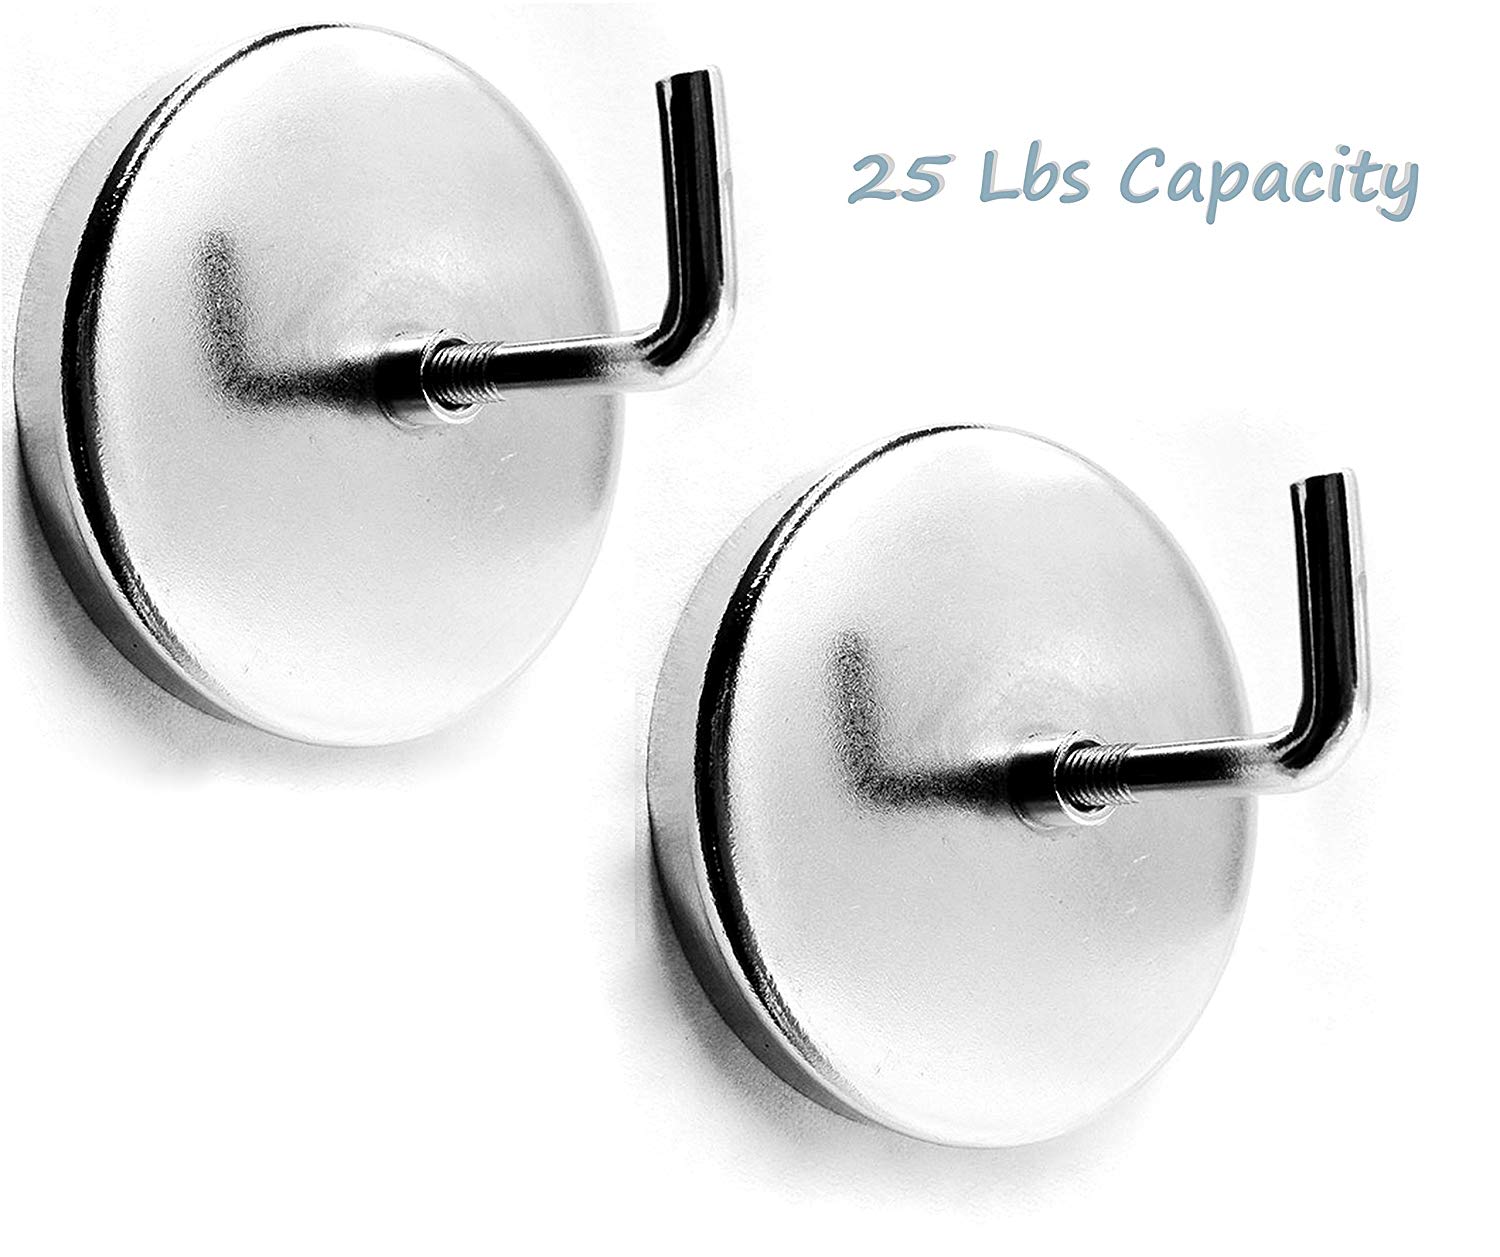 2pc Alazco Extra Strong 2.5" Magnetic Hook Set - up to 25 Lb Capacity Quality Chrome Plated For Tools, Coats, Purse, Towels, Utensils